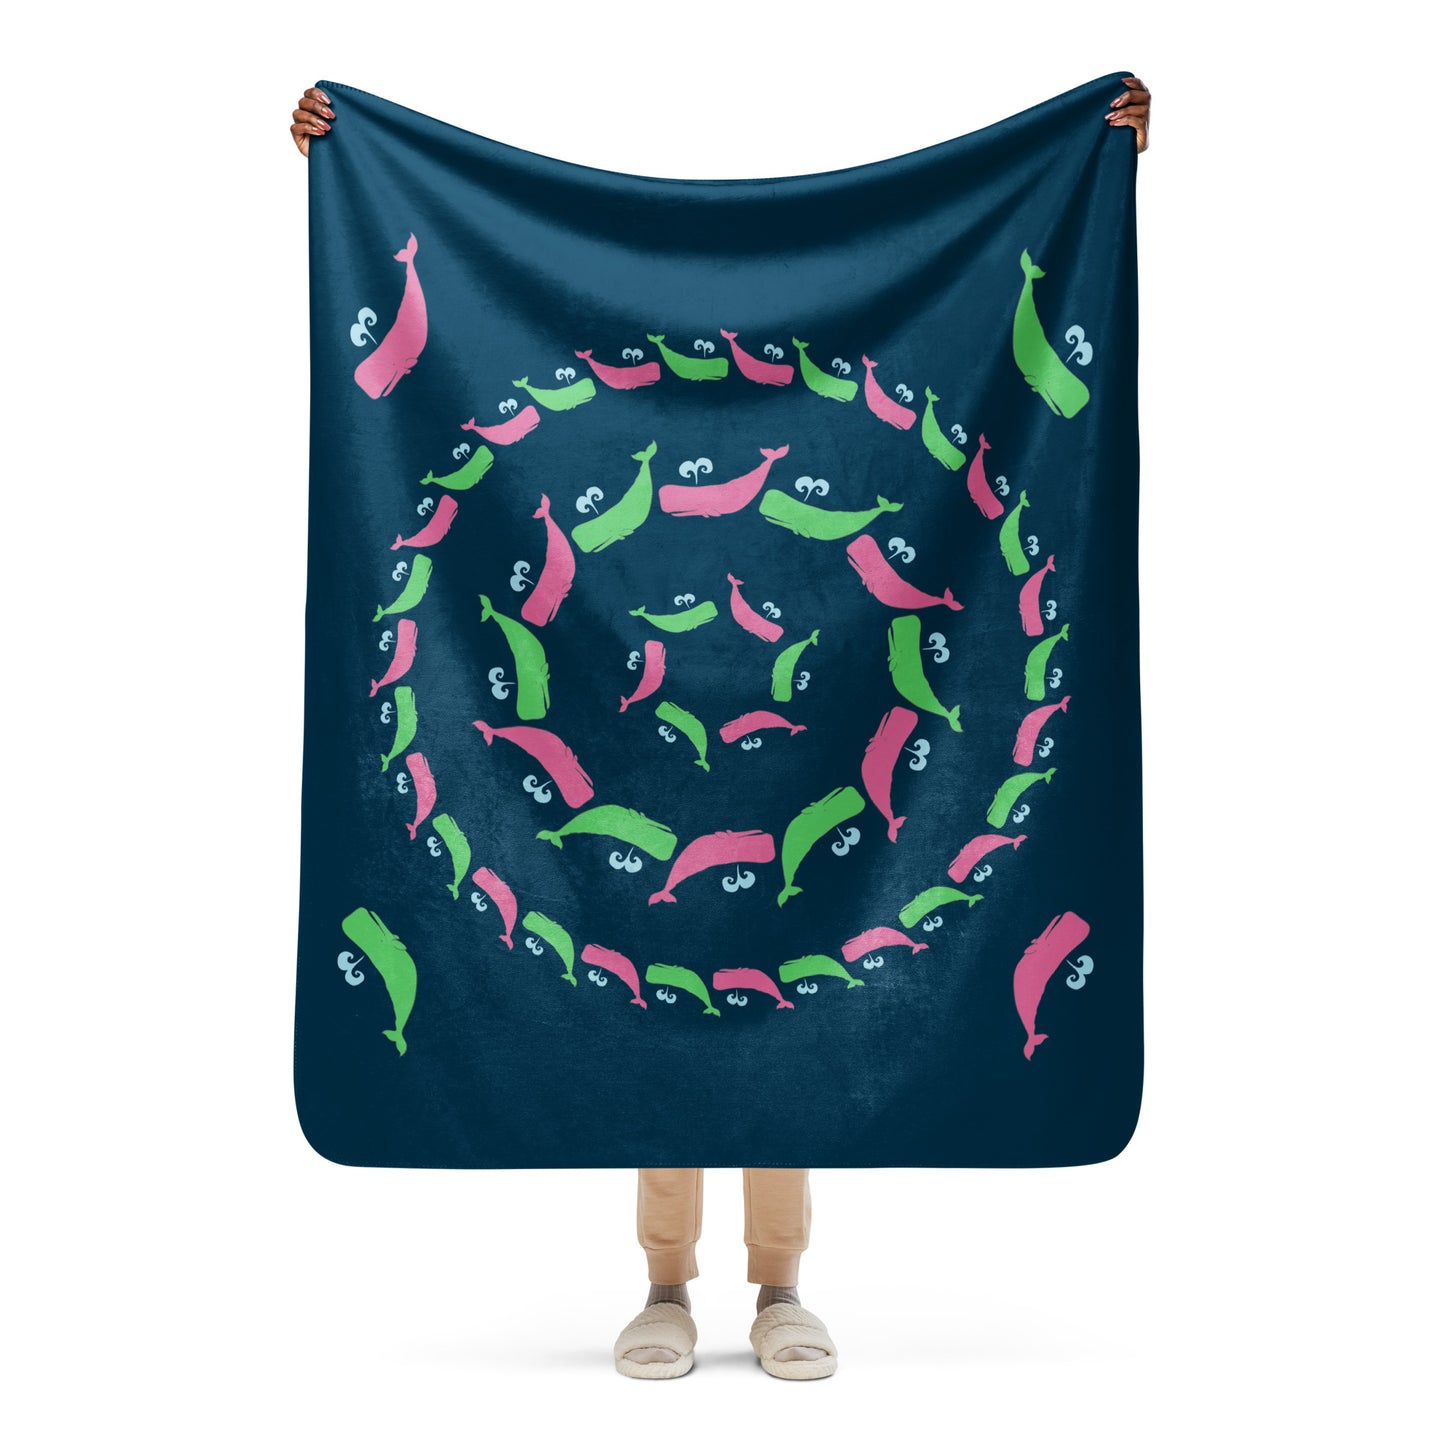 Sperm Whale Sherpa blanket - Pink and Green on Navy